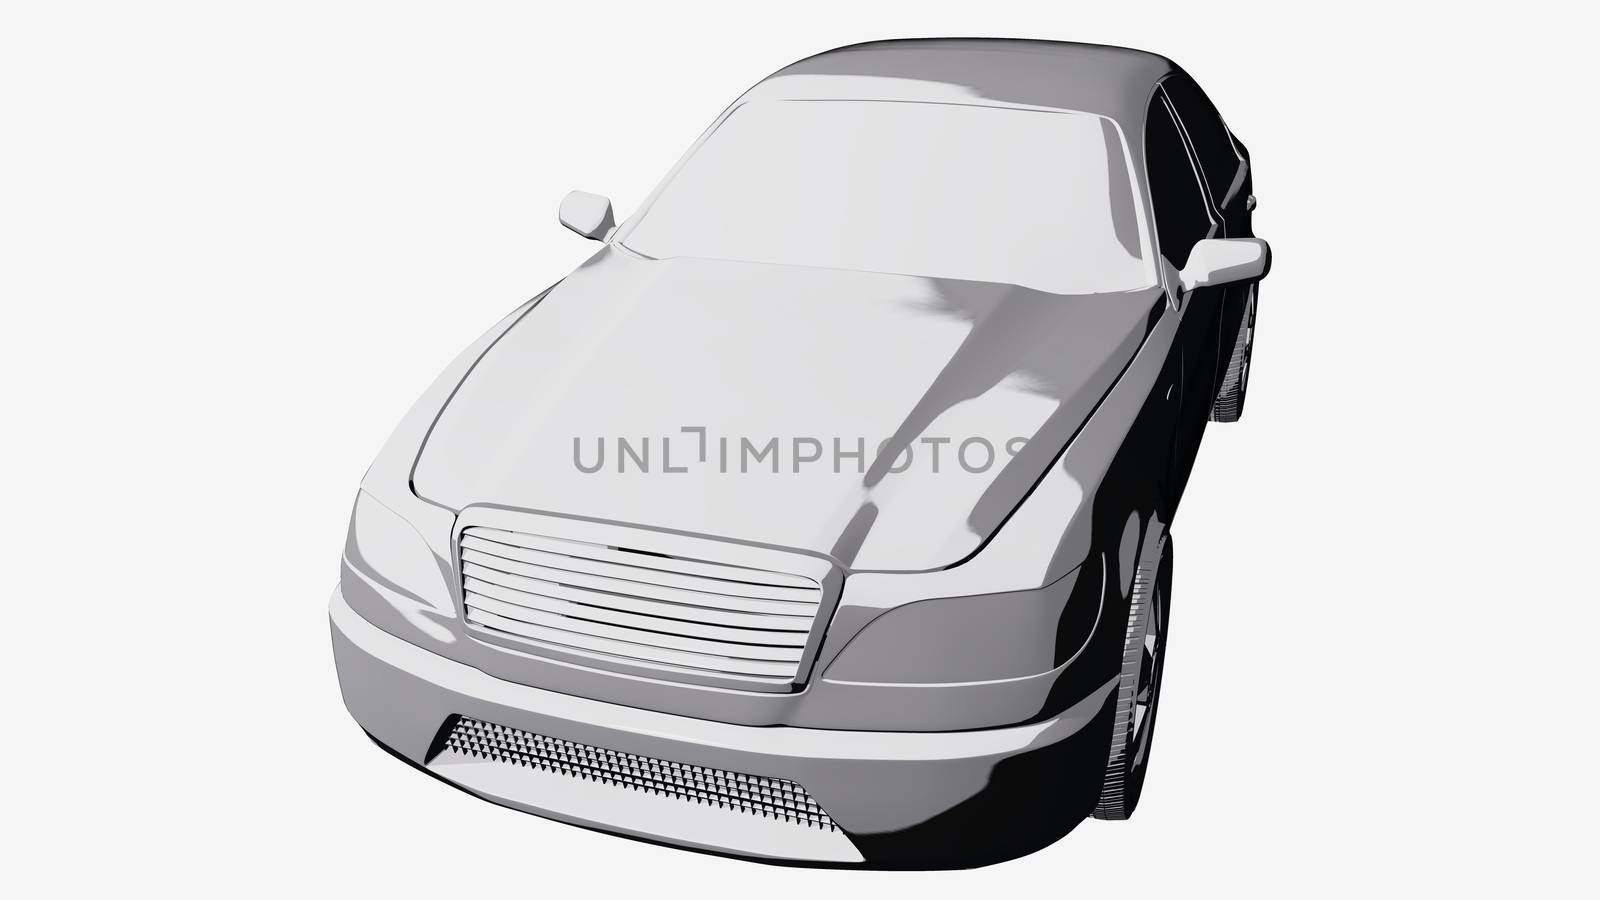 Grey car comic book 3D illustration isolated on white background